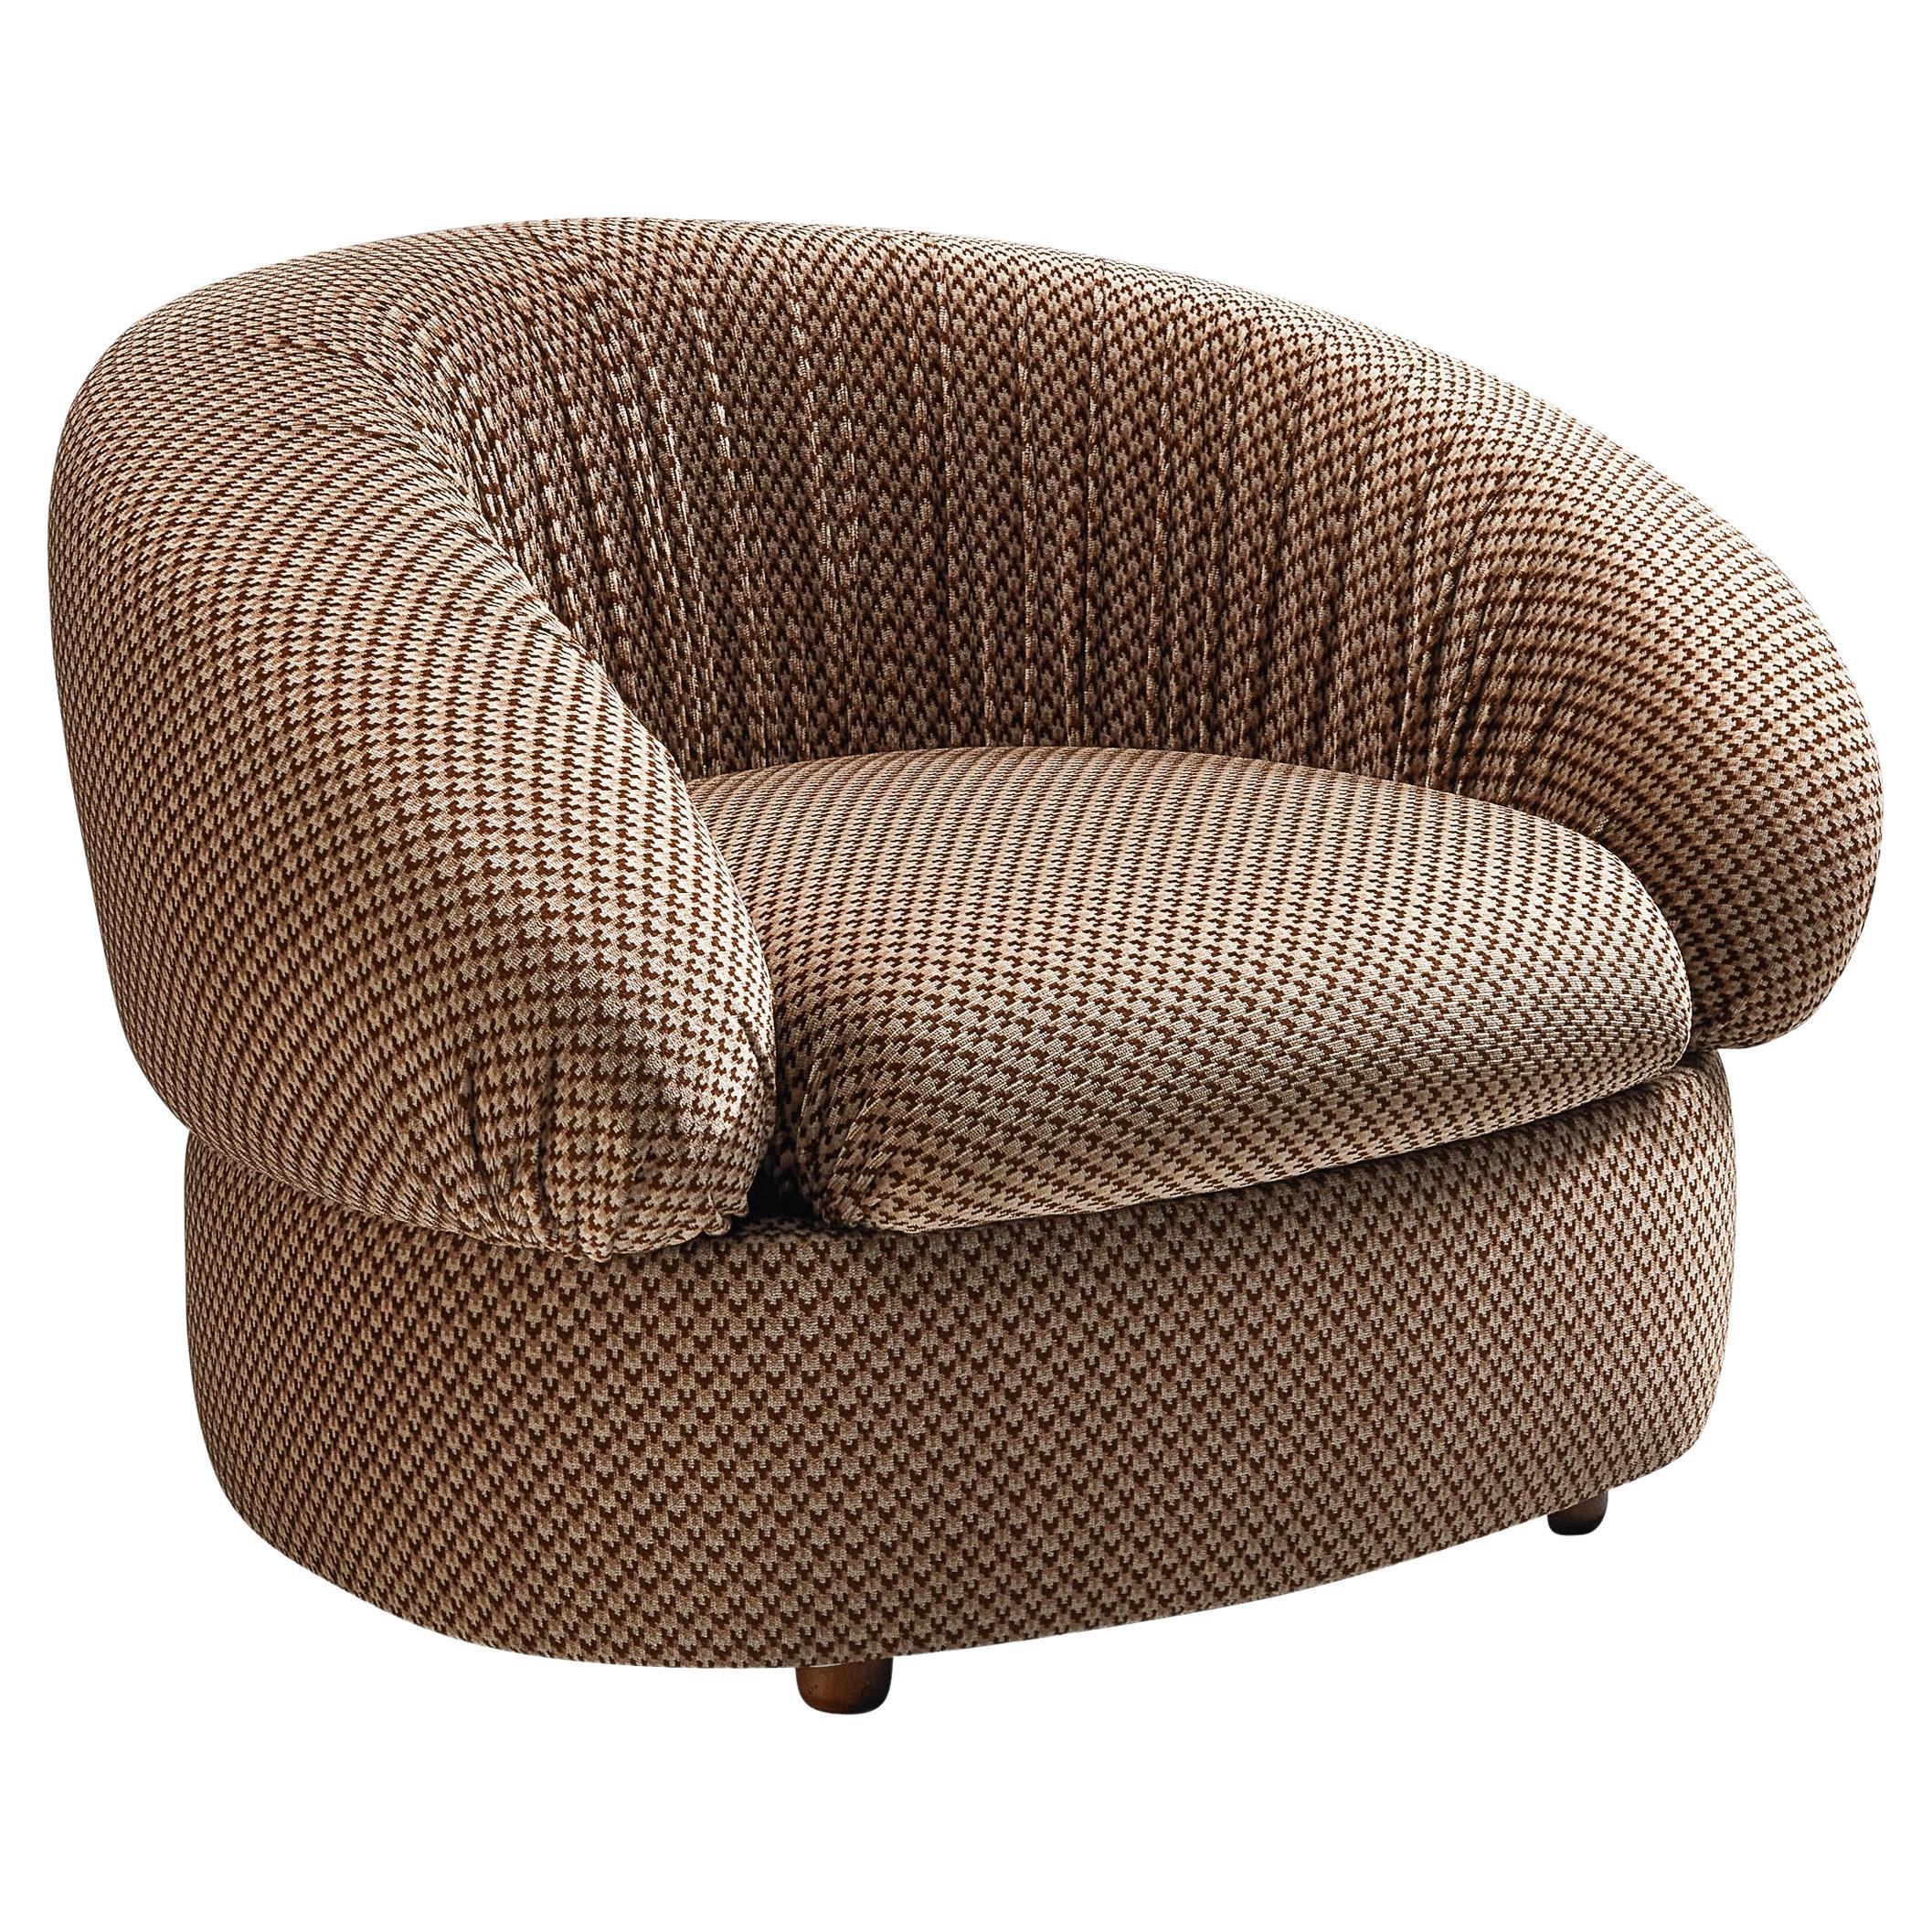 Characteristic Italian Lounge Chair in Striped Sand Upholstery